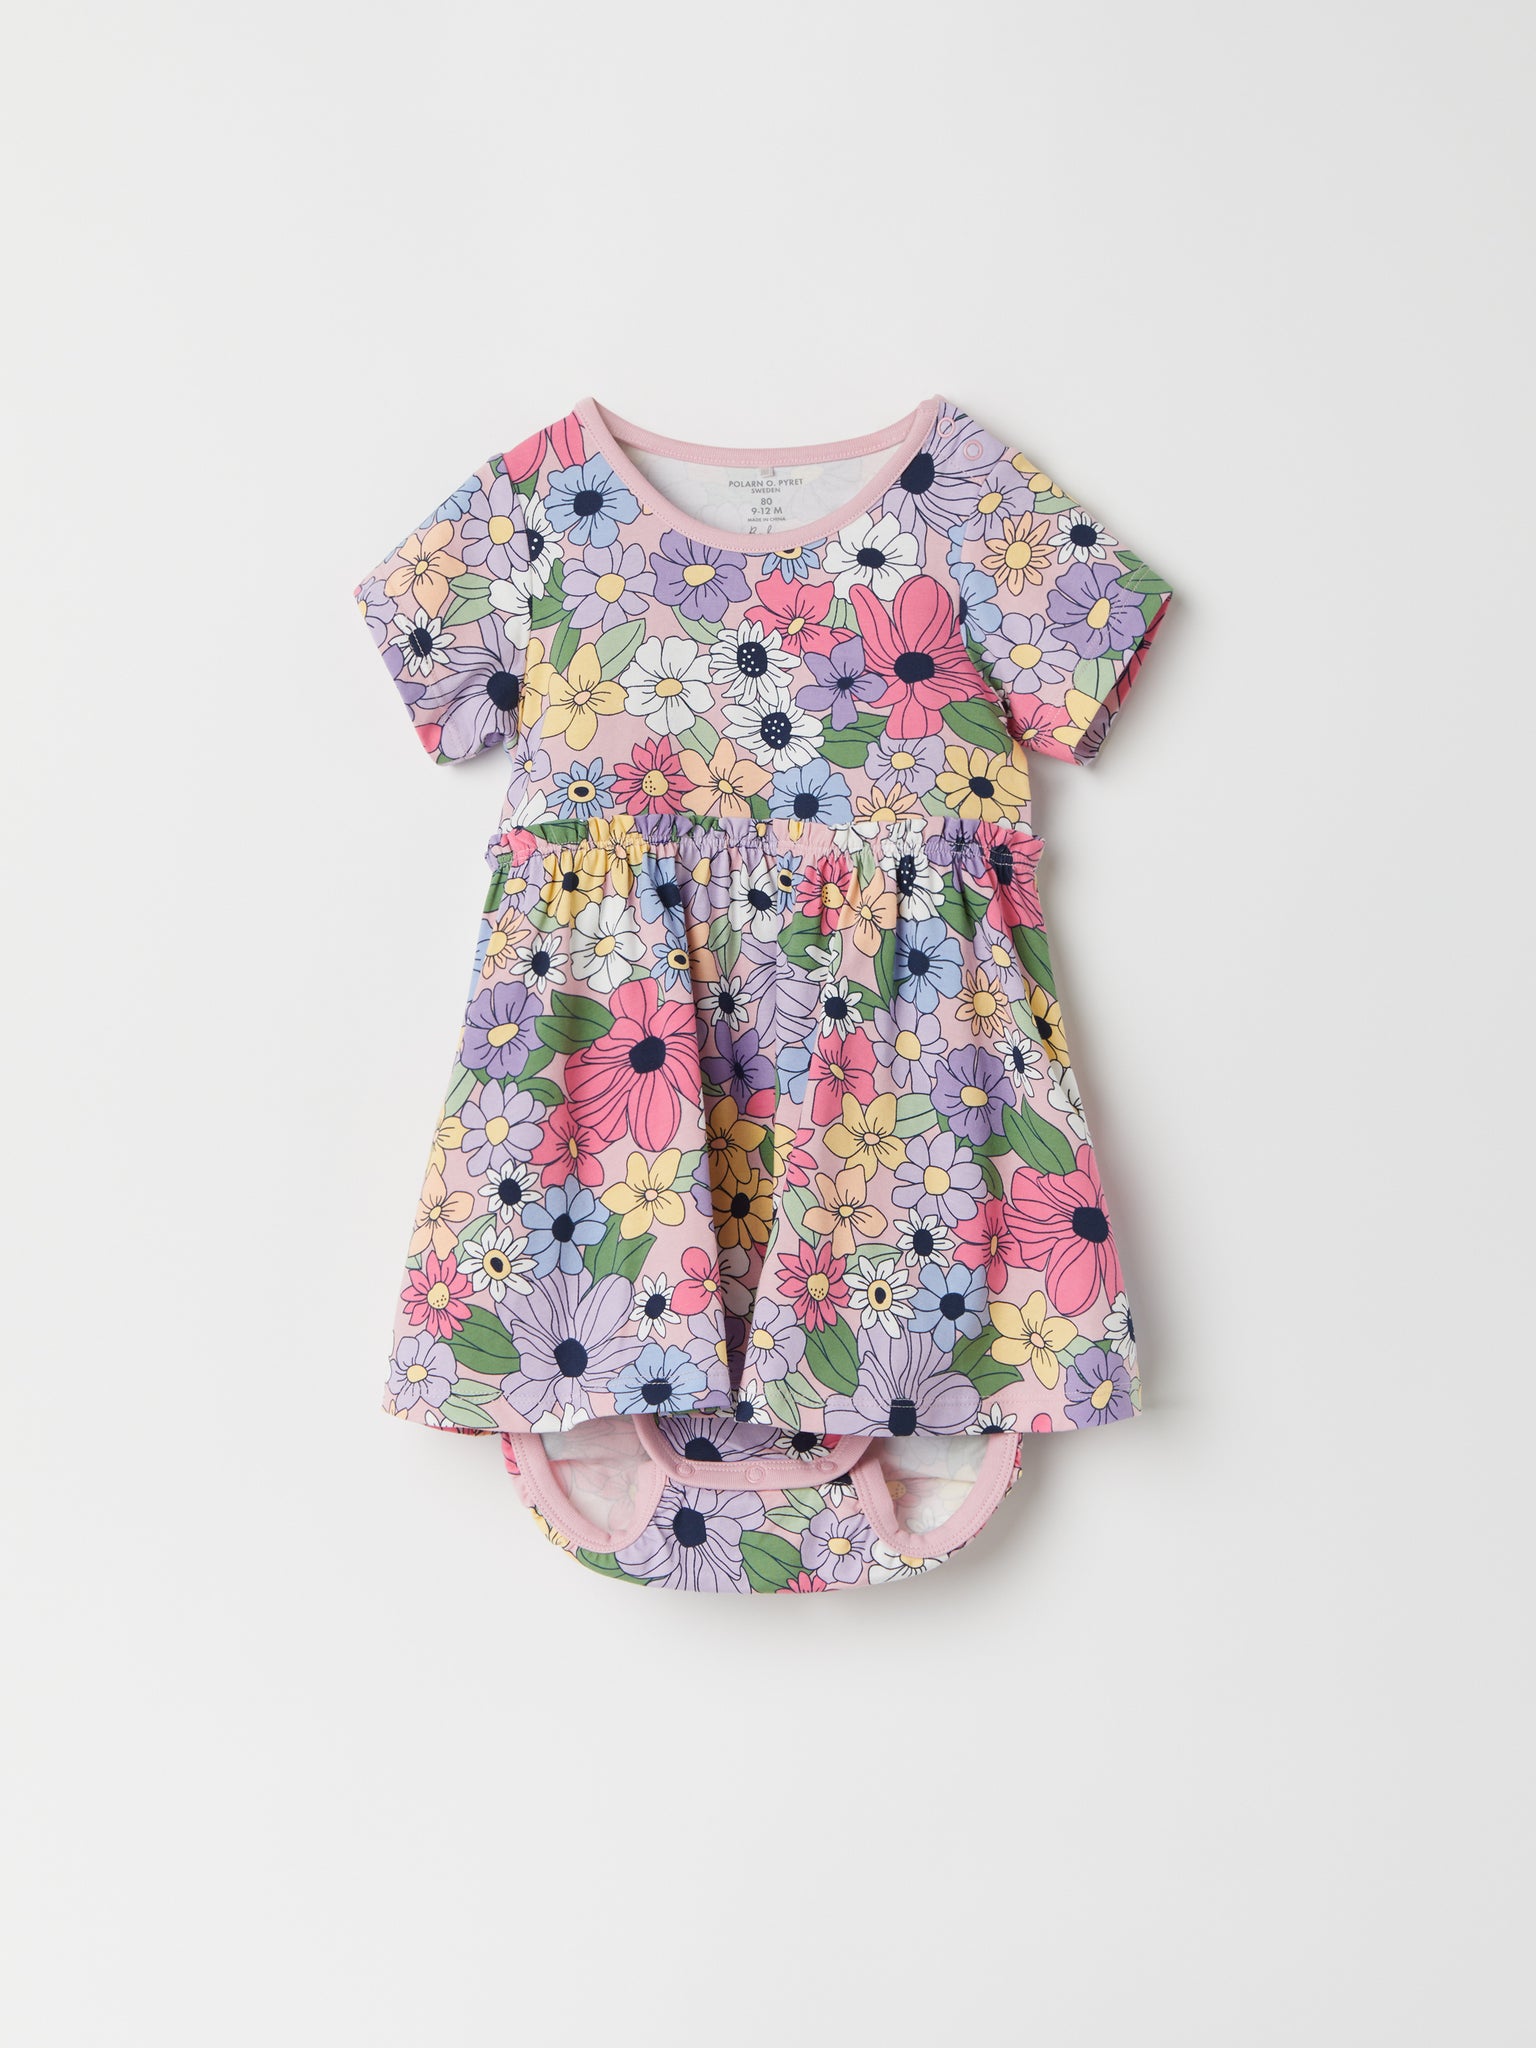 Floral Print Bodysuit & Dress from the Polarn O. Pyret baby collection. Nordic kids clothes made from sustainable sources.